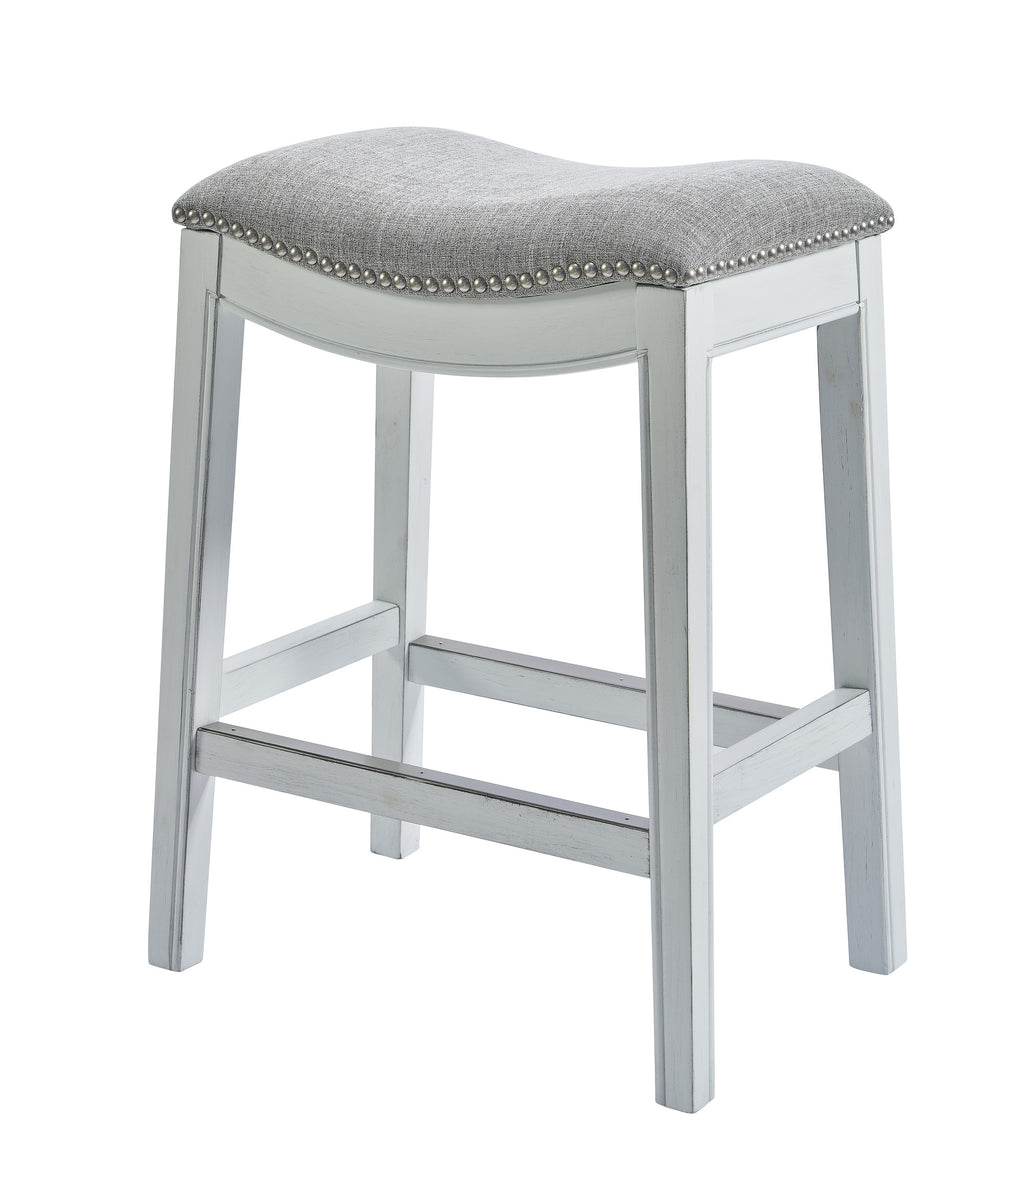 Counter Height Saddle Style Counter Stool With Grey Fabric And Nail Head Trim - 99fab 